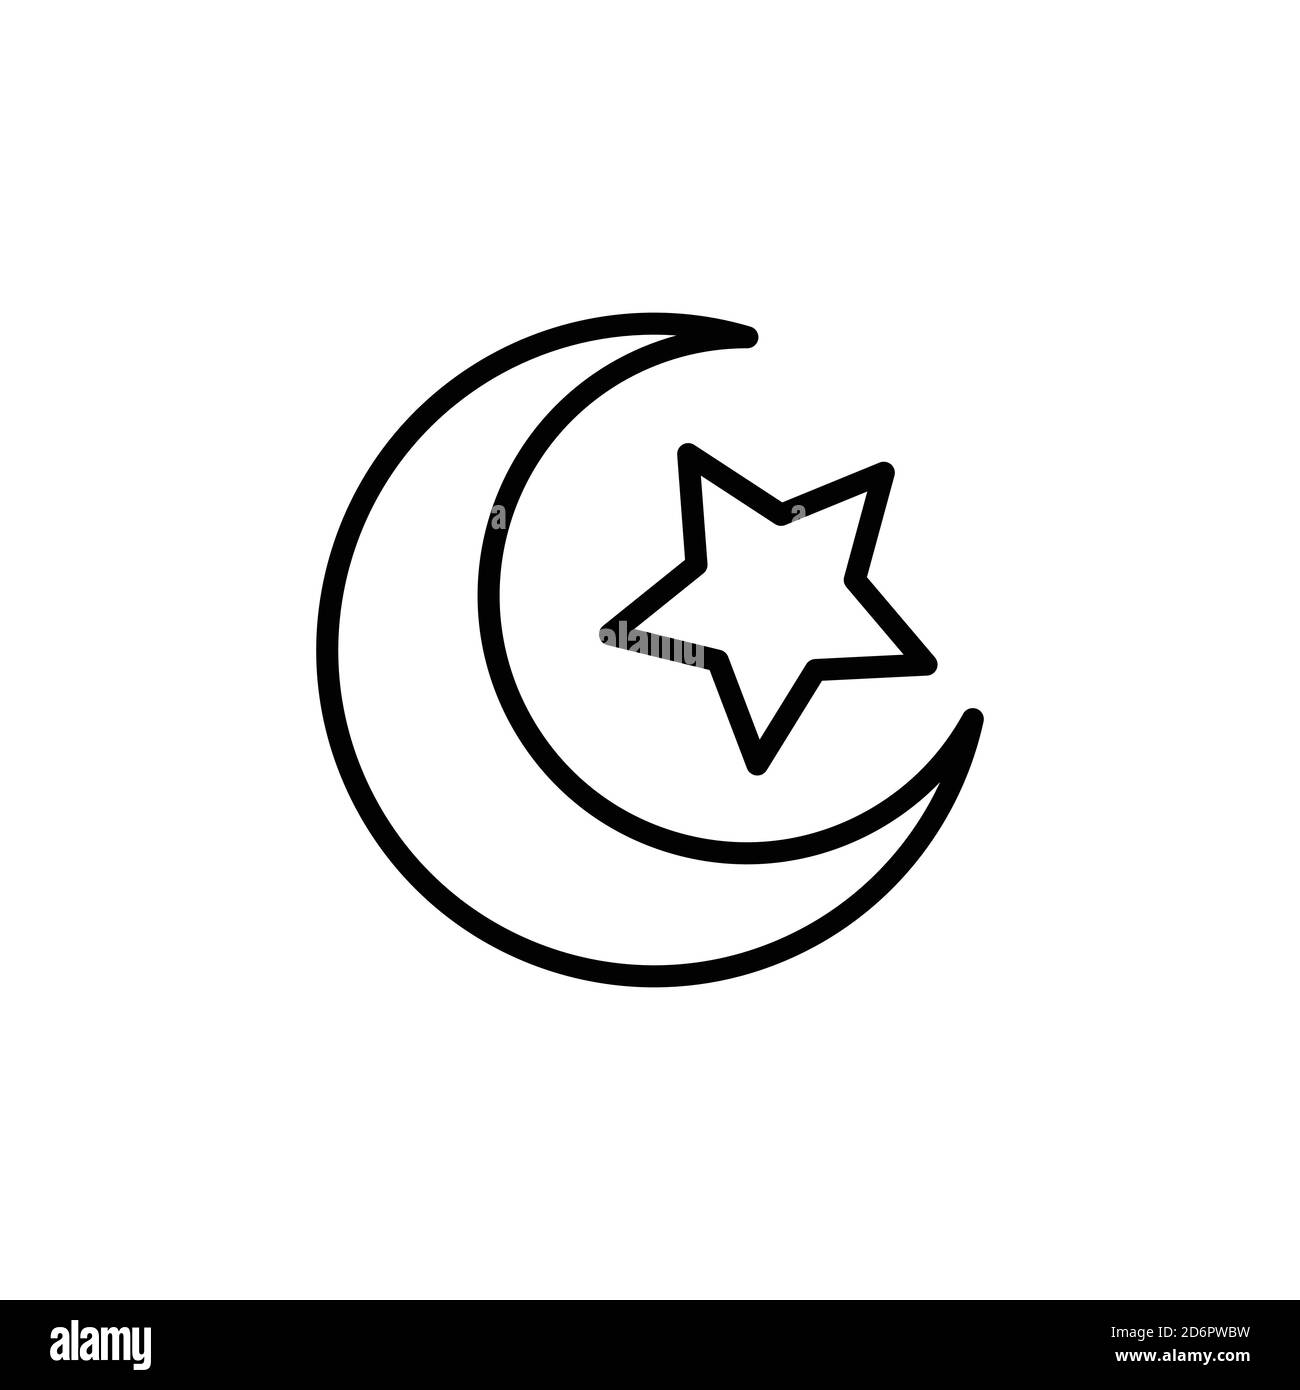 crescent moon and star outline